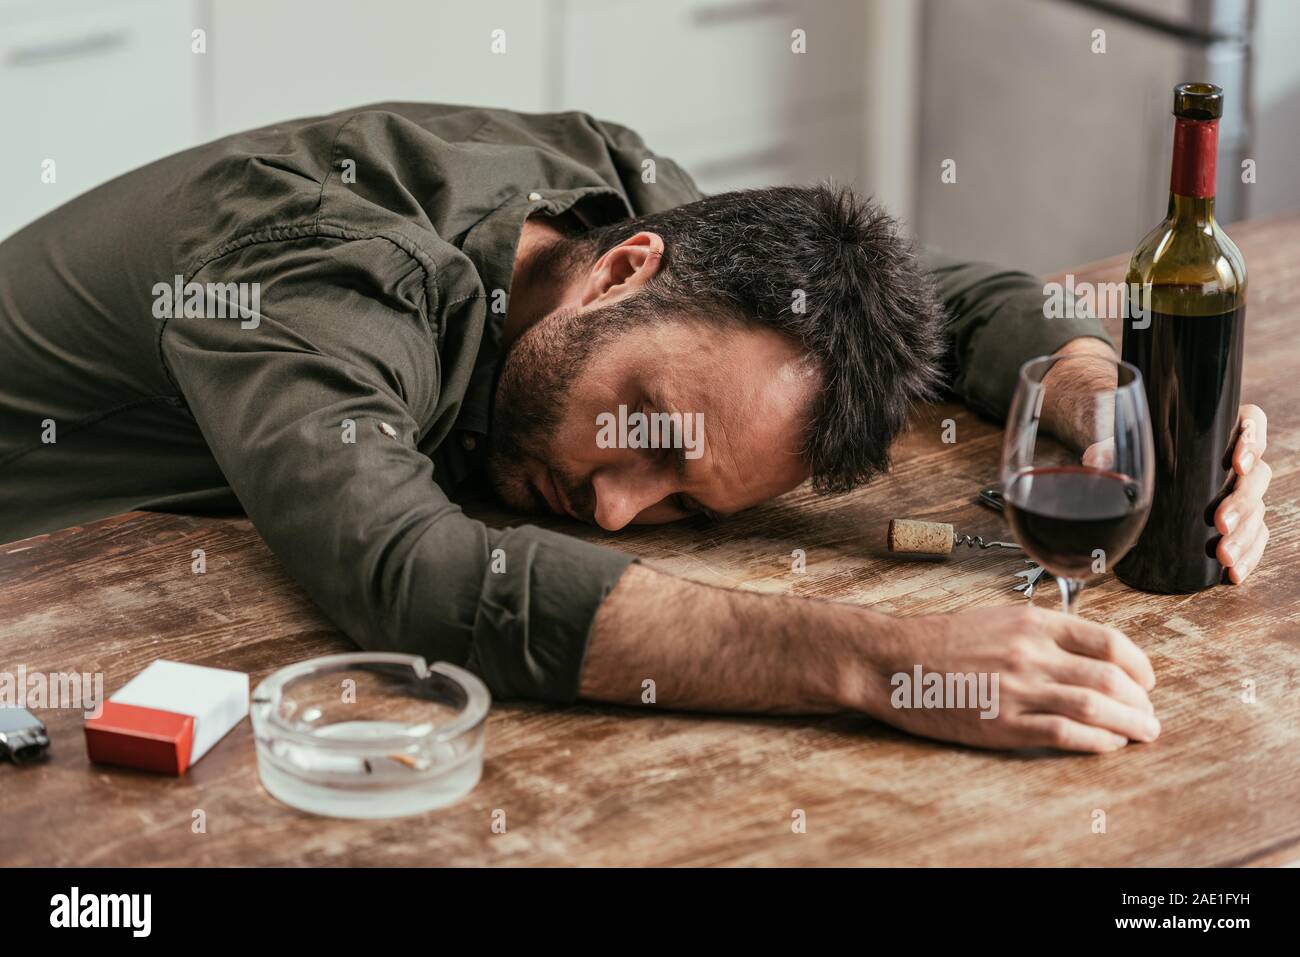 Drunk man sleeping on table with wine and cigarettes Stock Photo - Alamy